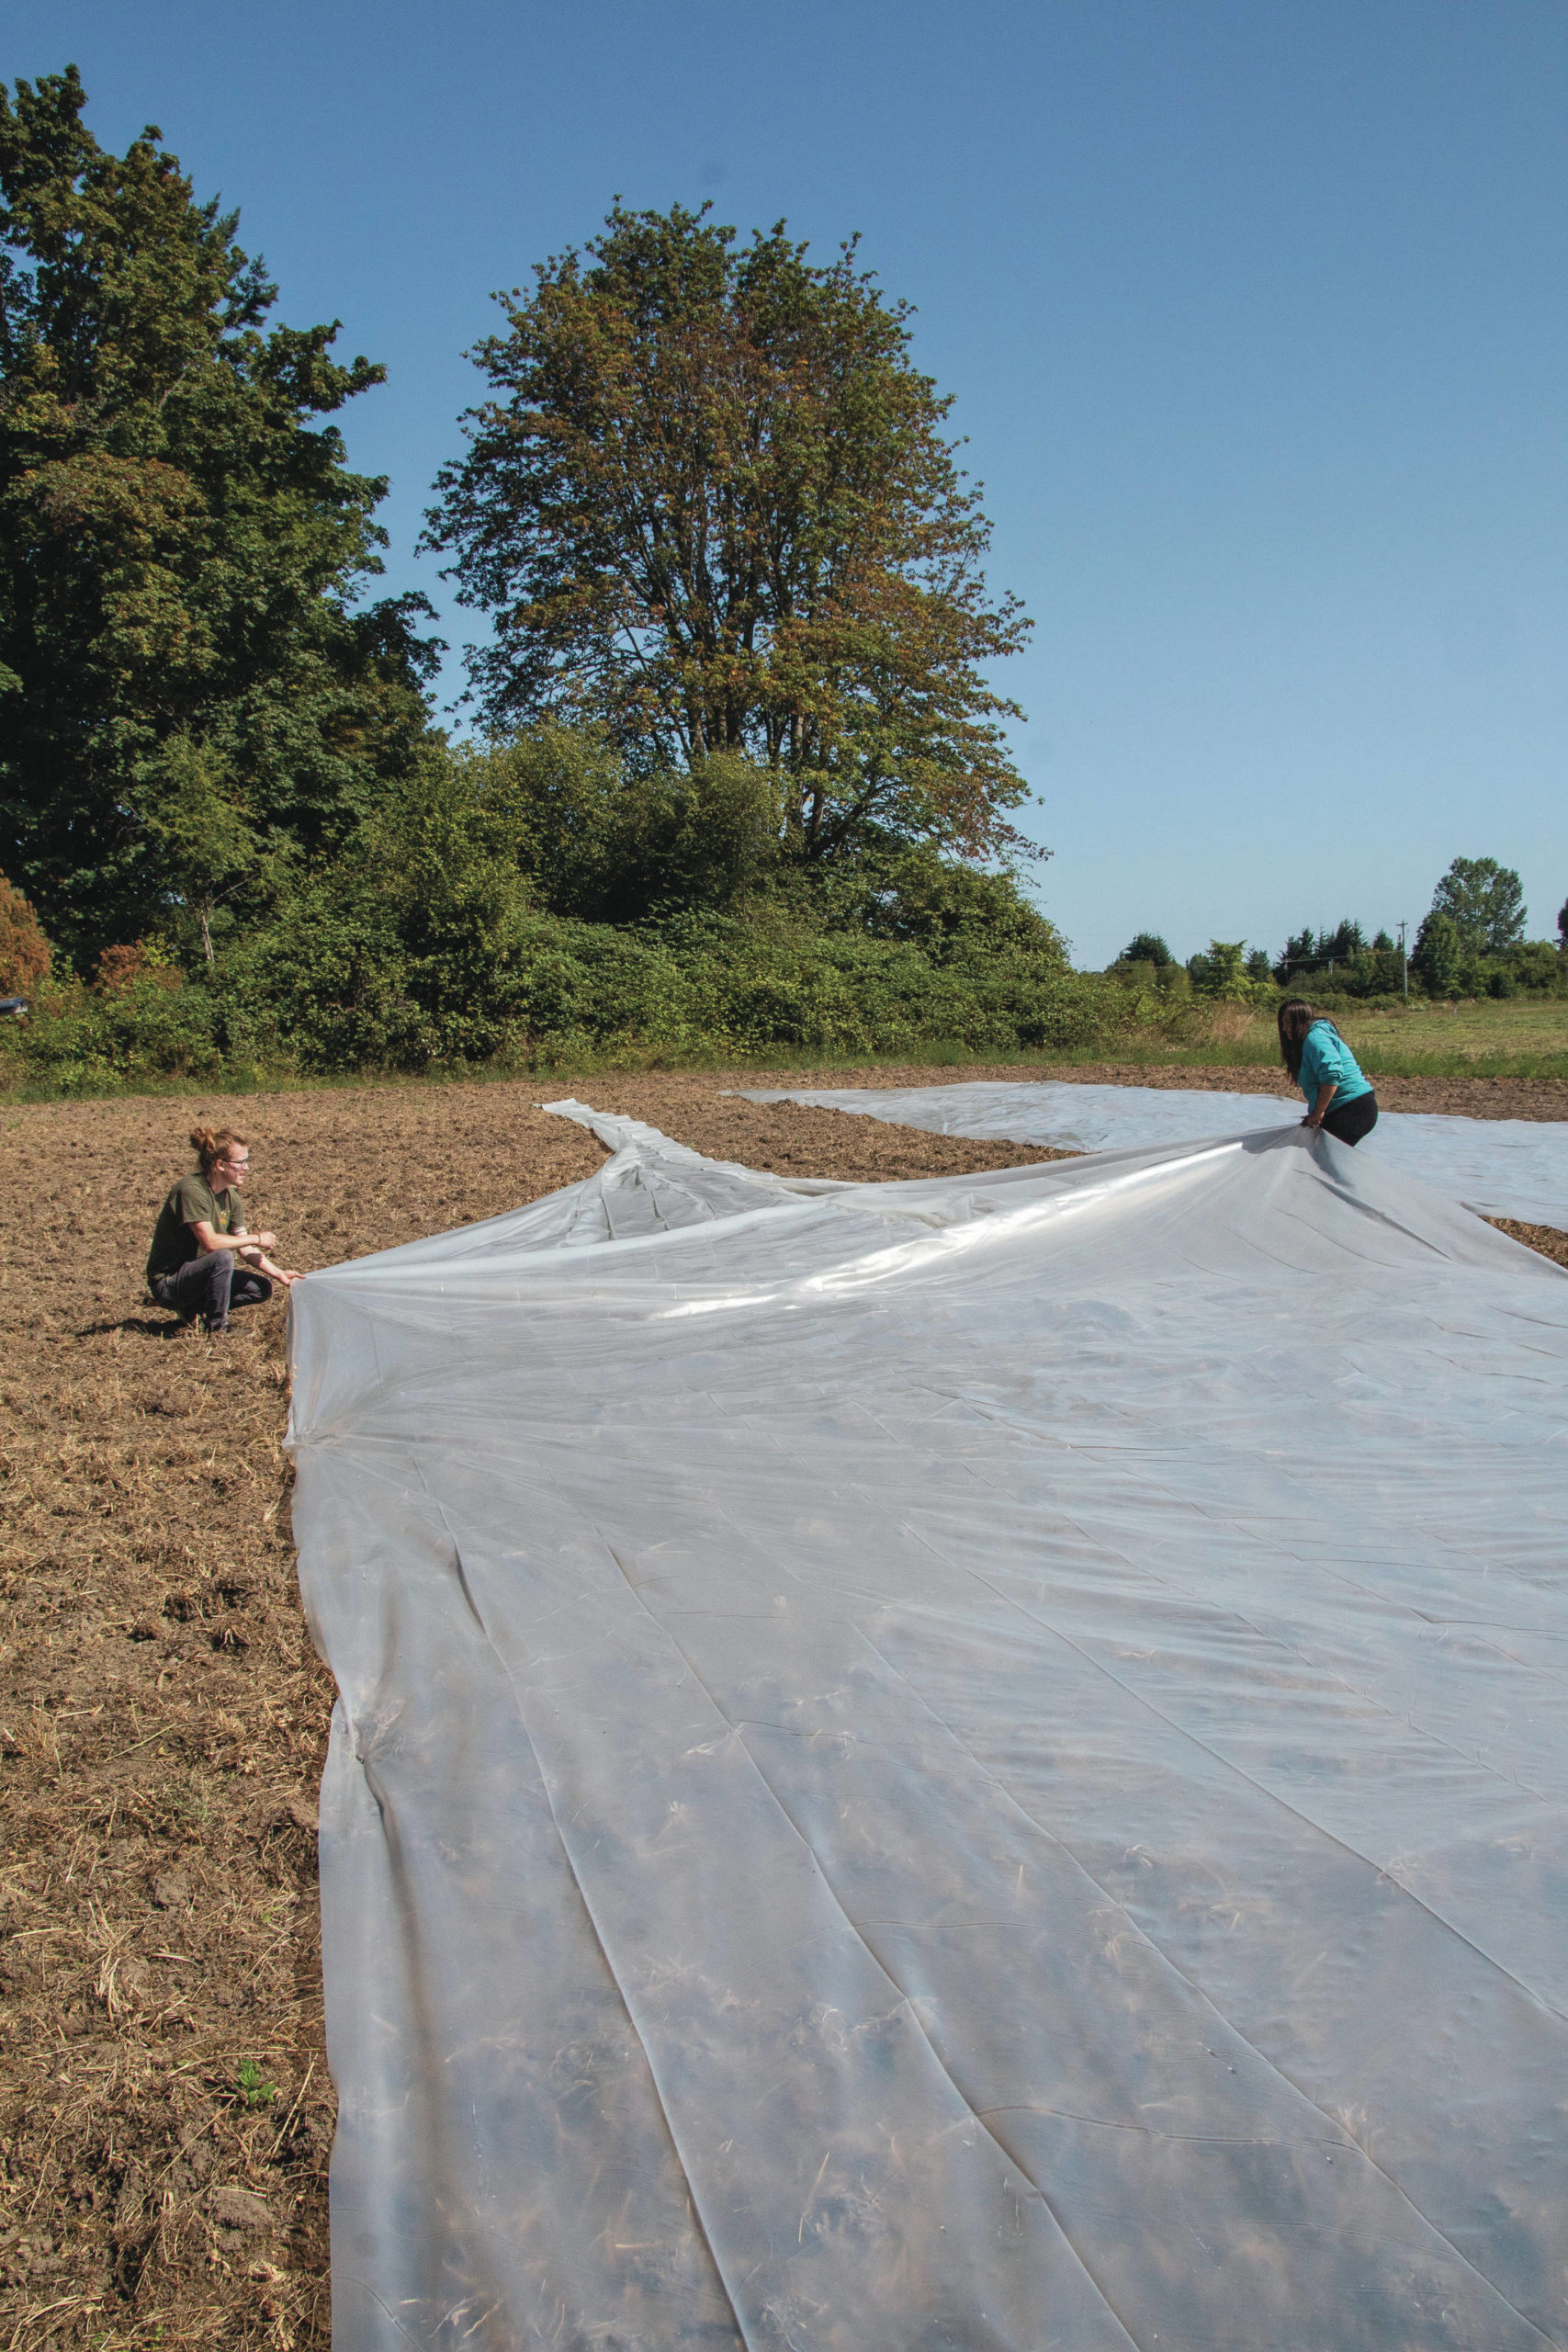 In August, staff with the Jamestown S’Klallam Tribe’s Traditional Foods Project lay gardening plastic on tilled soil to kill invasive plants in preparation for planting native plants. (Tiffany Royal)